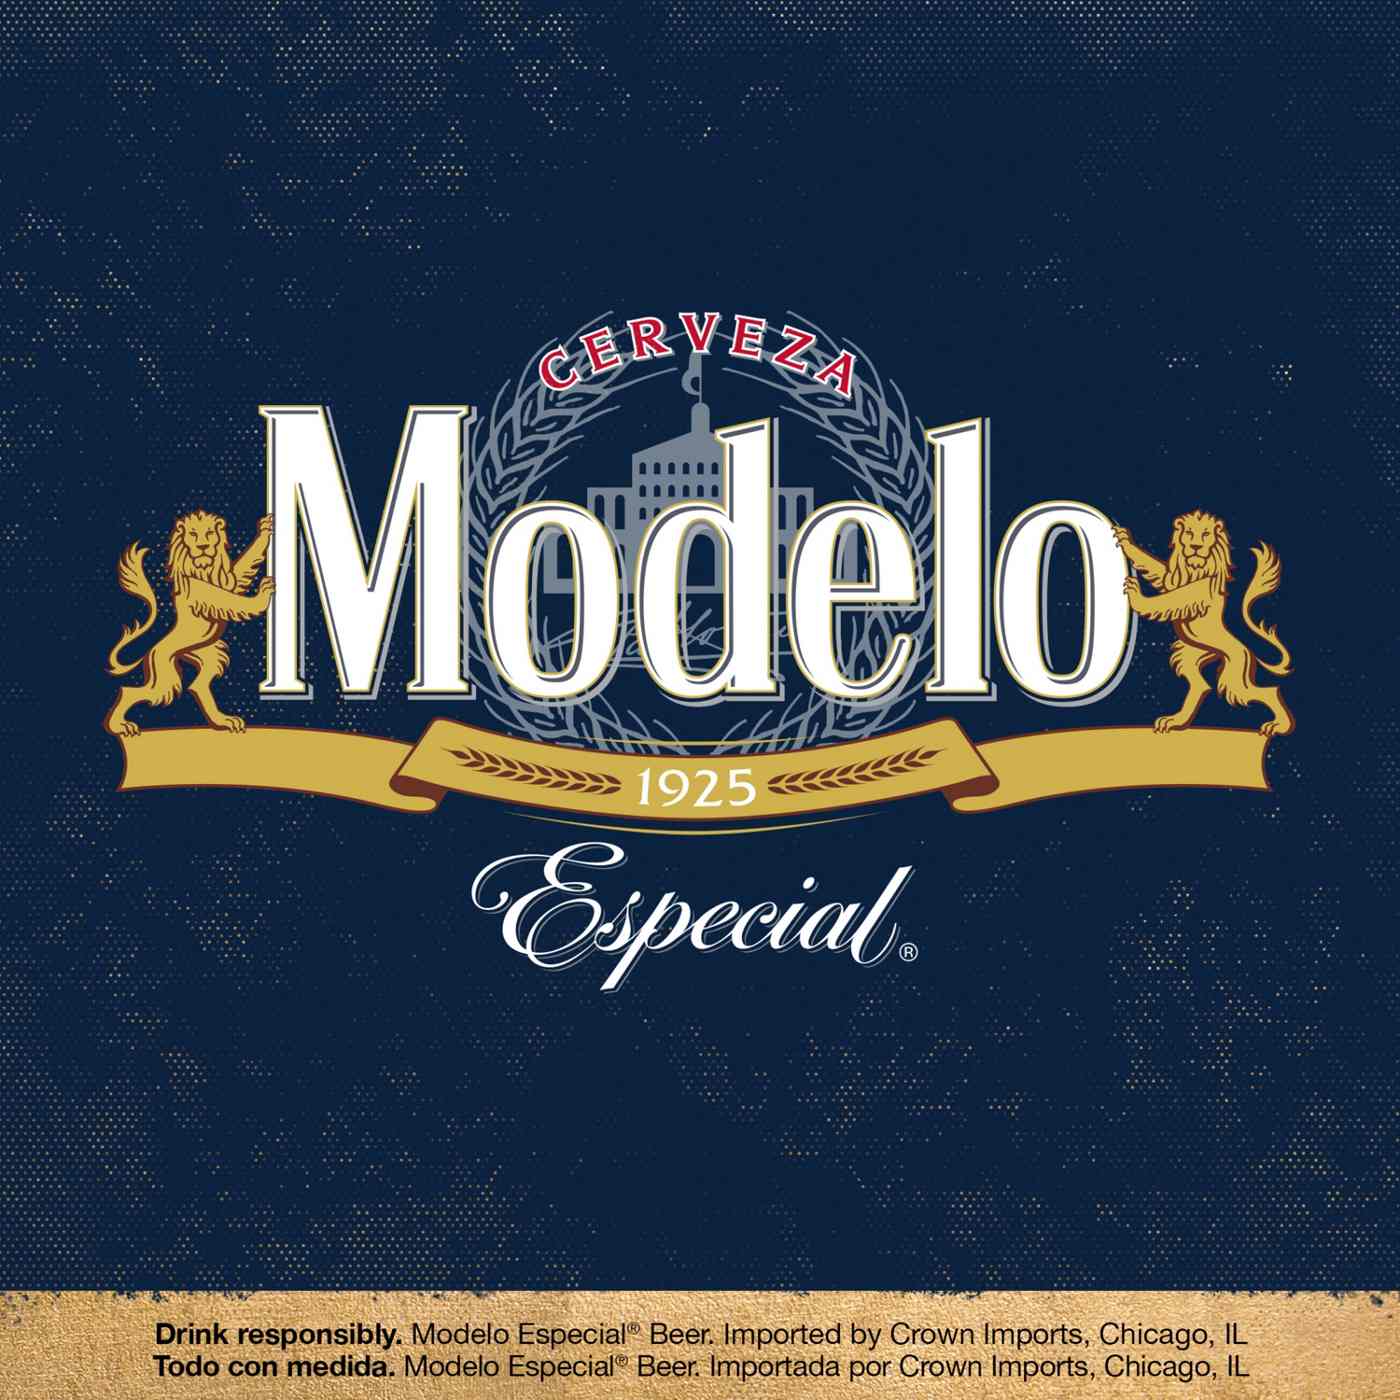 Modelo Especial Mexican Lager Import Beer 12 oz Bottles, 6 pk; image 2 of 10